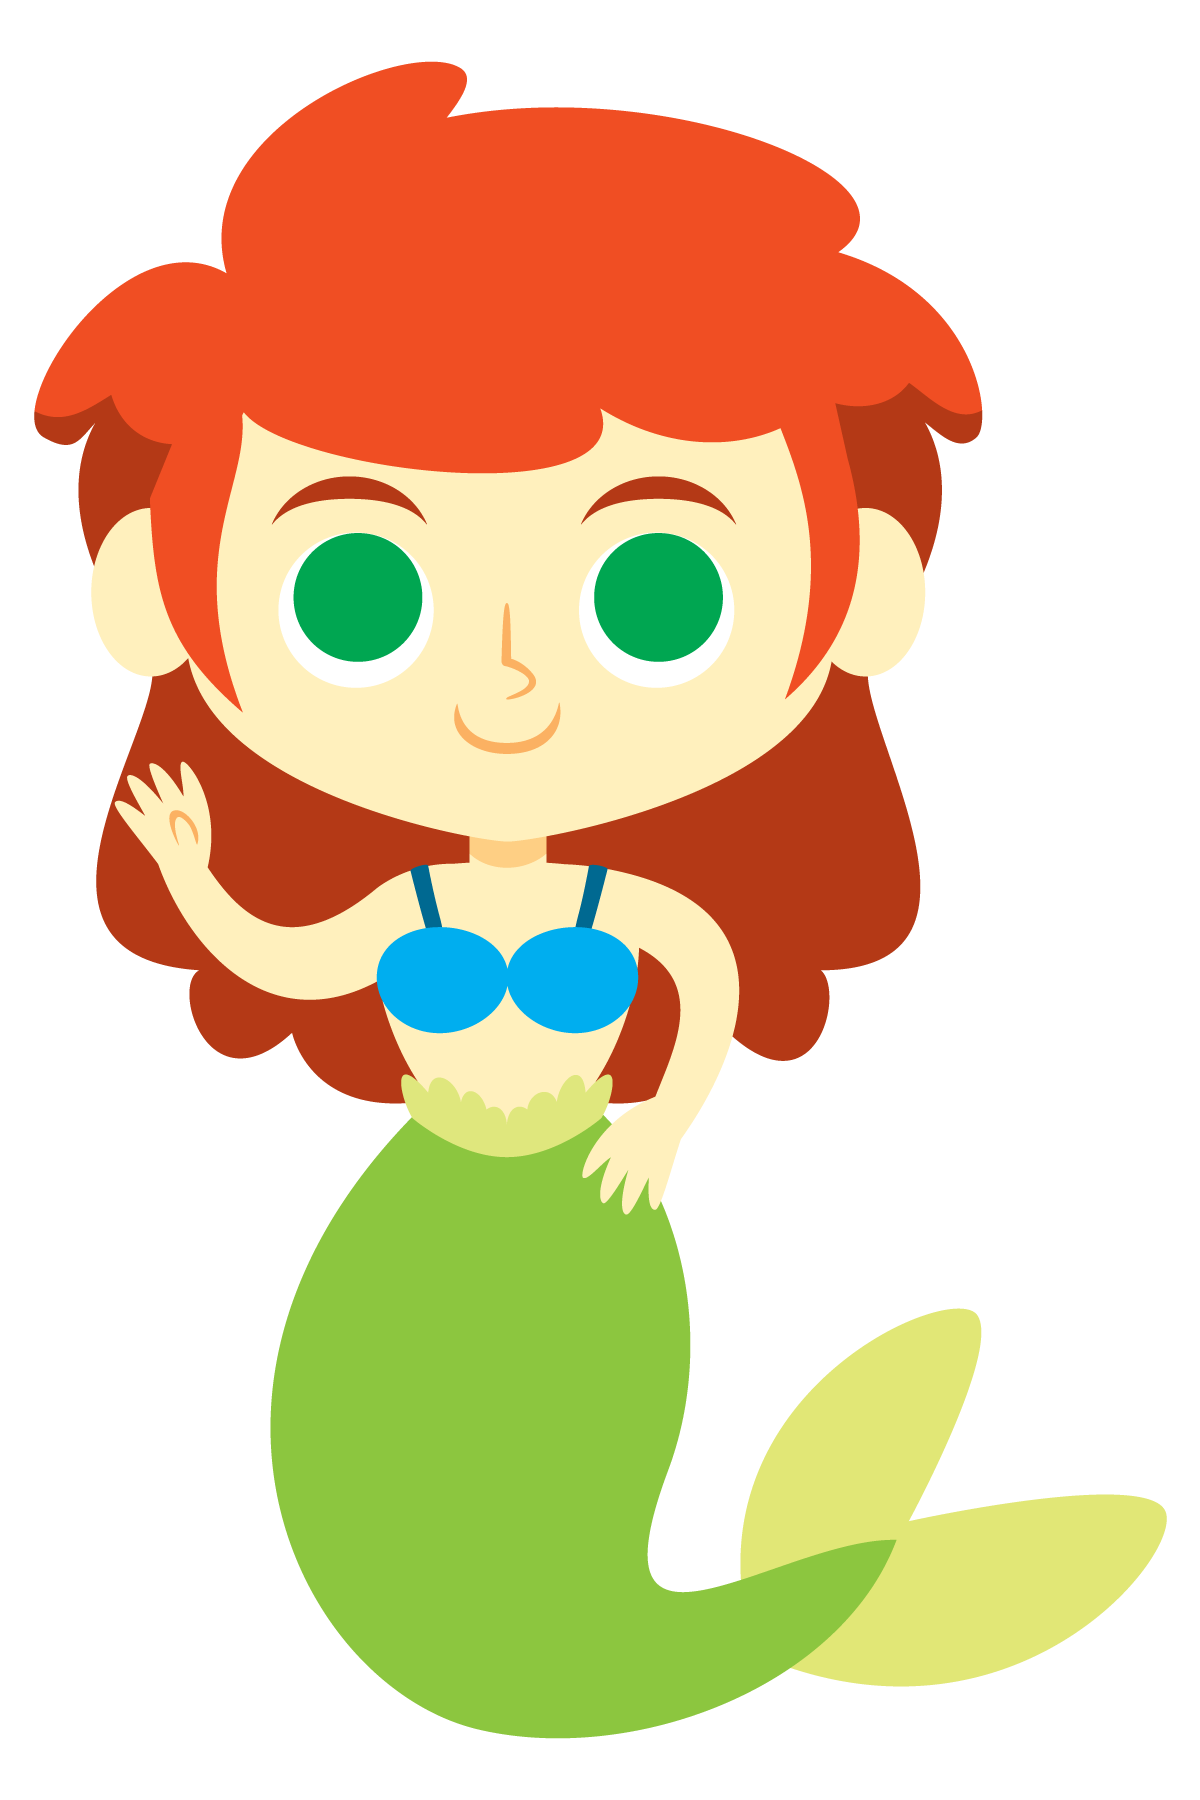 Mermaid Clip Art Free Download - Free Clipart Images